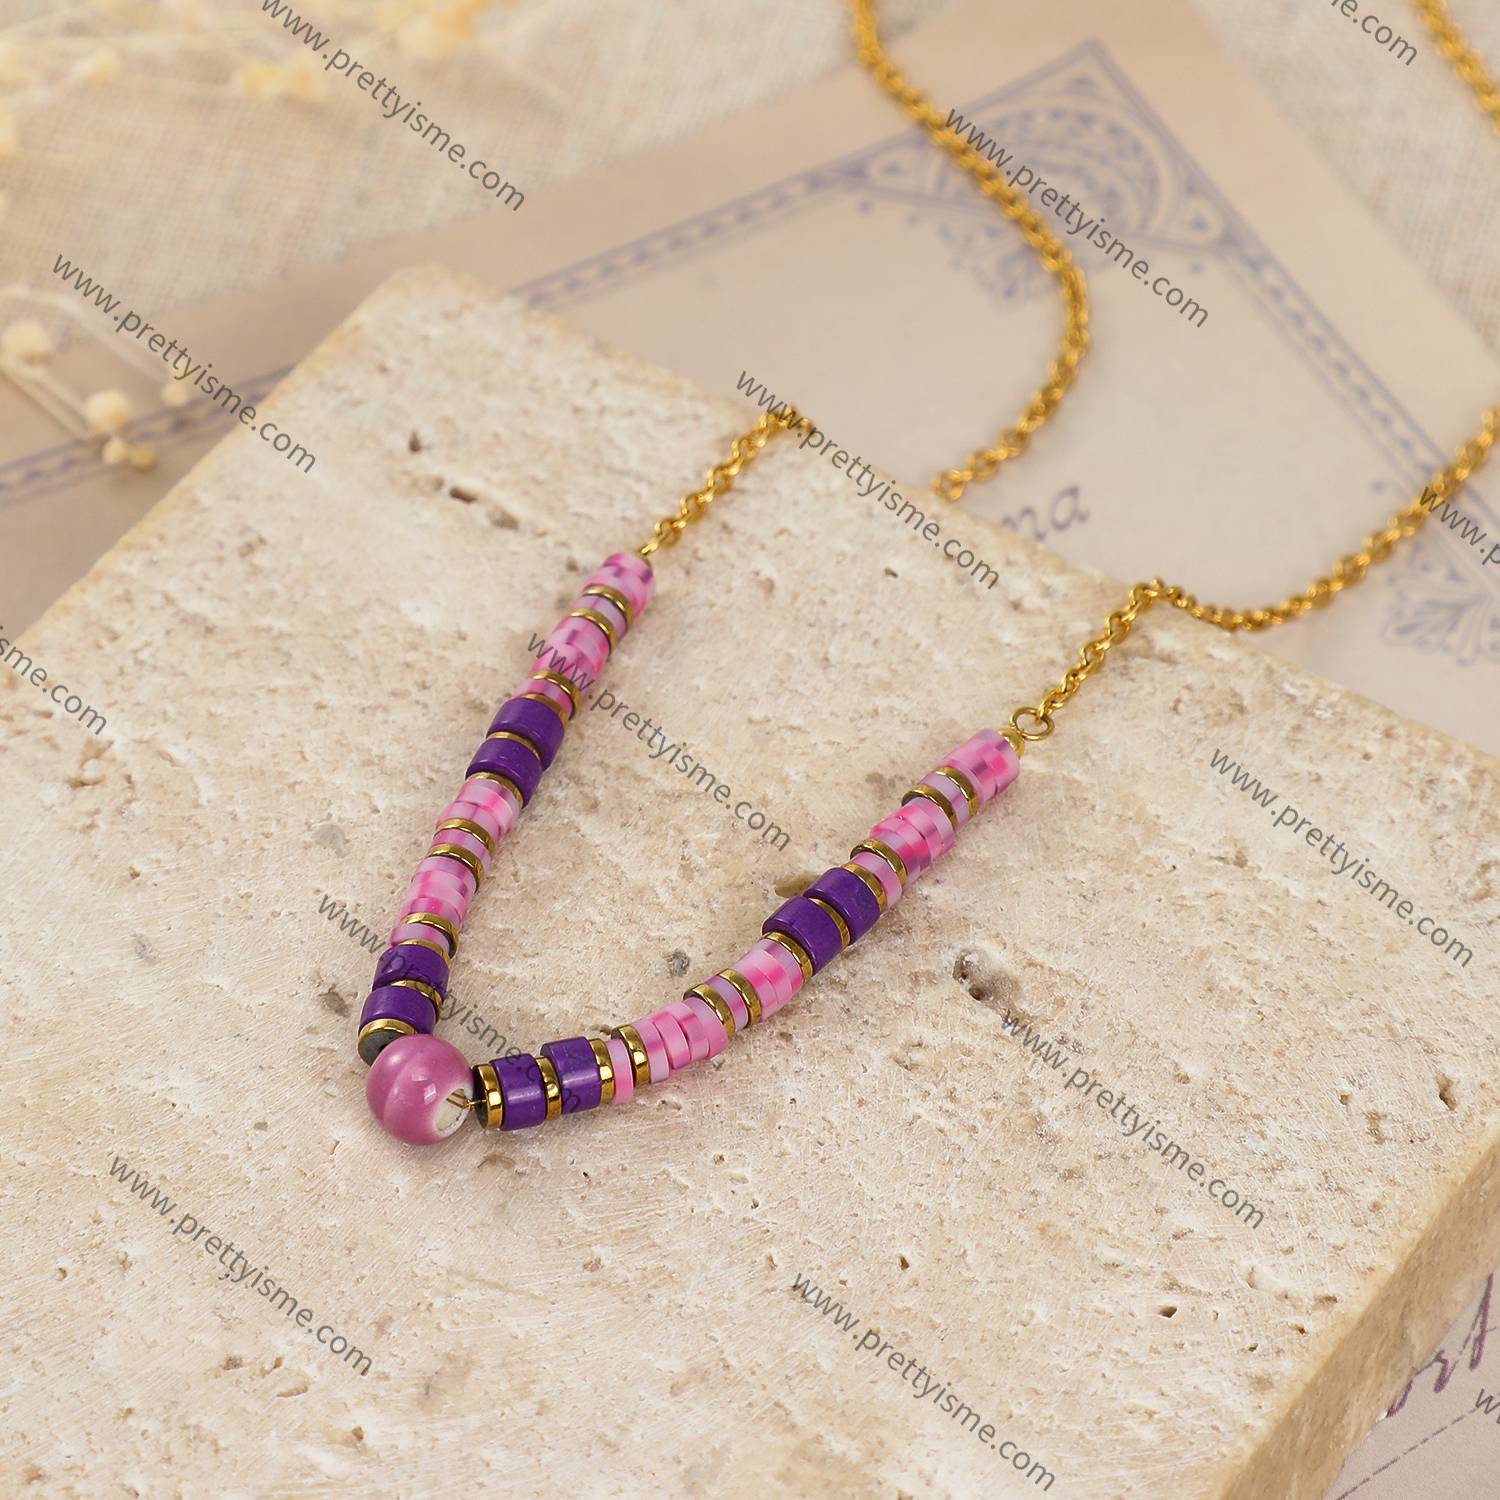 Pretty Is Me Collection Wholesale 18K Gold Plated Stainless Steel Beads Beaded Pink Purple Polymer Clay Choker Necklace Women (2).webp